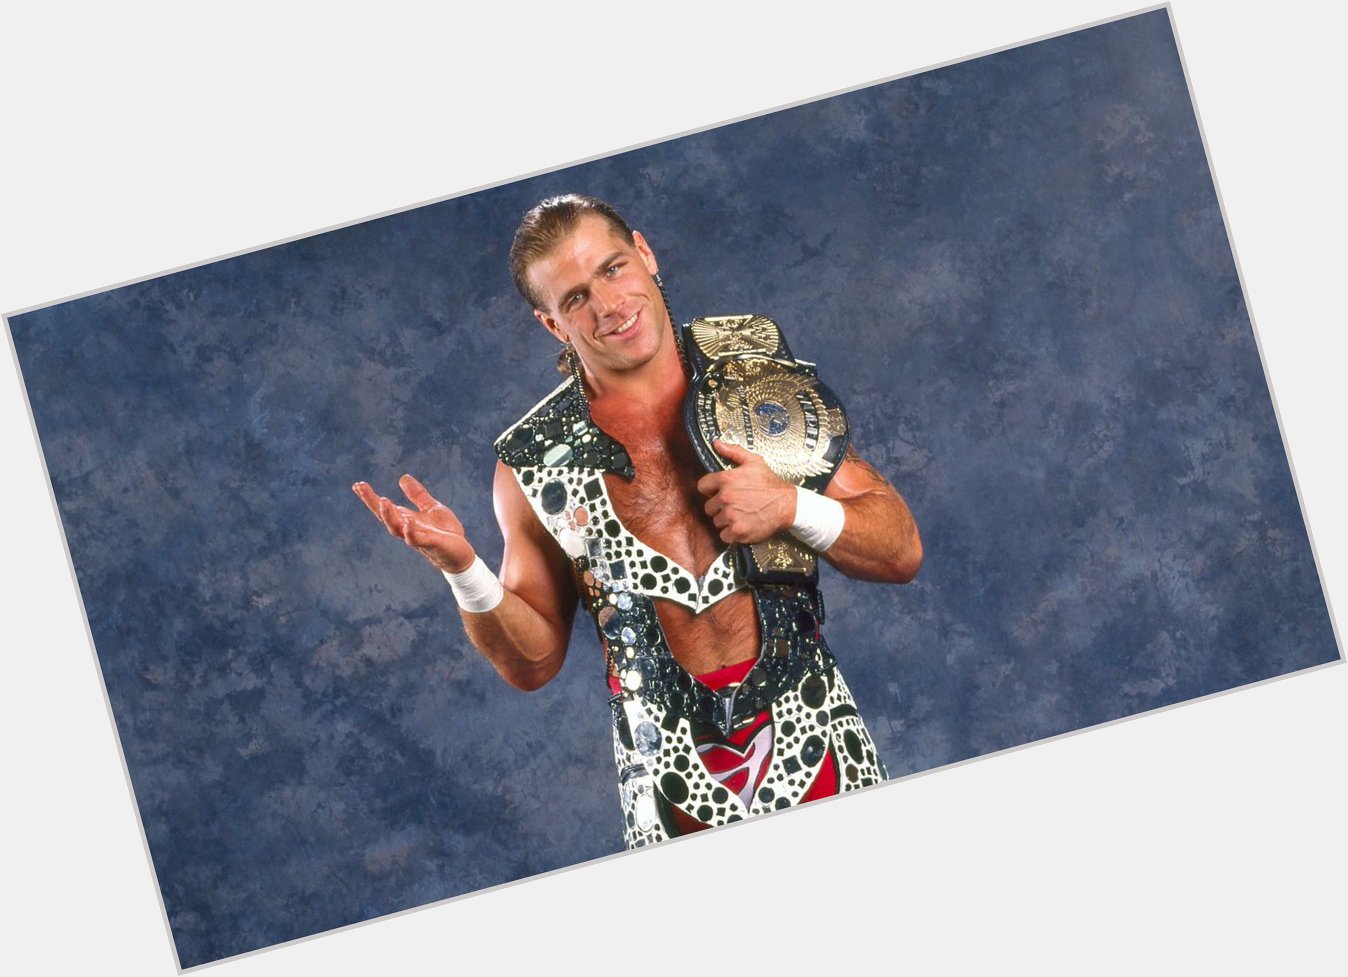 Happy birthday to my favorite wrestler of all time Shawn michaels       